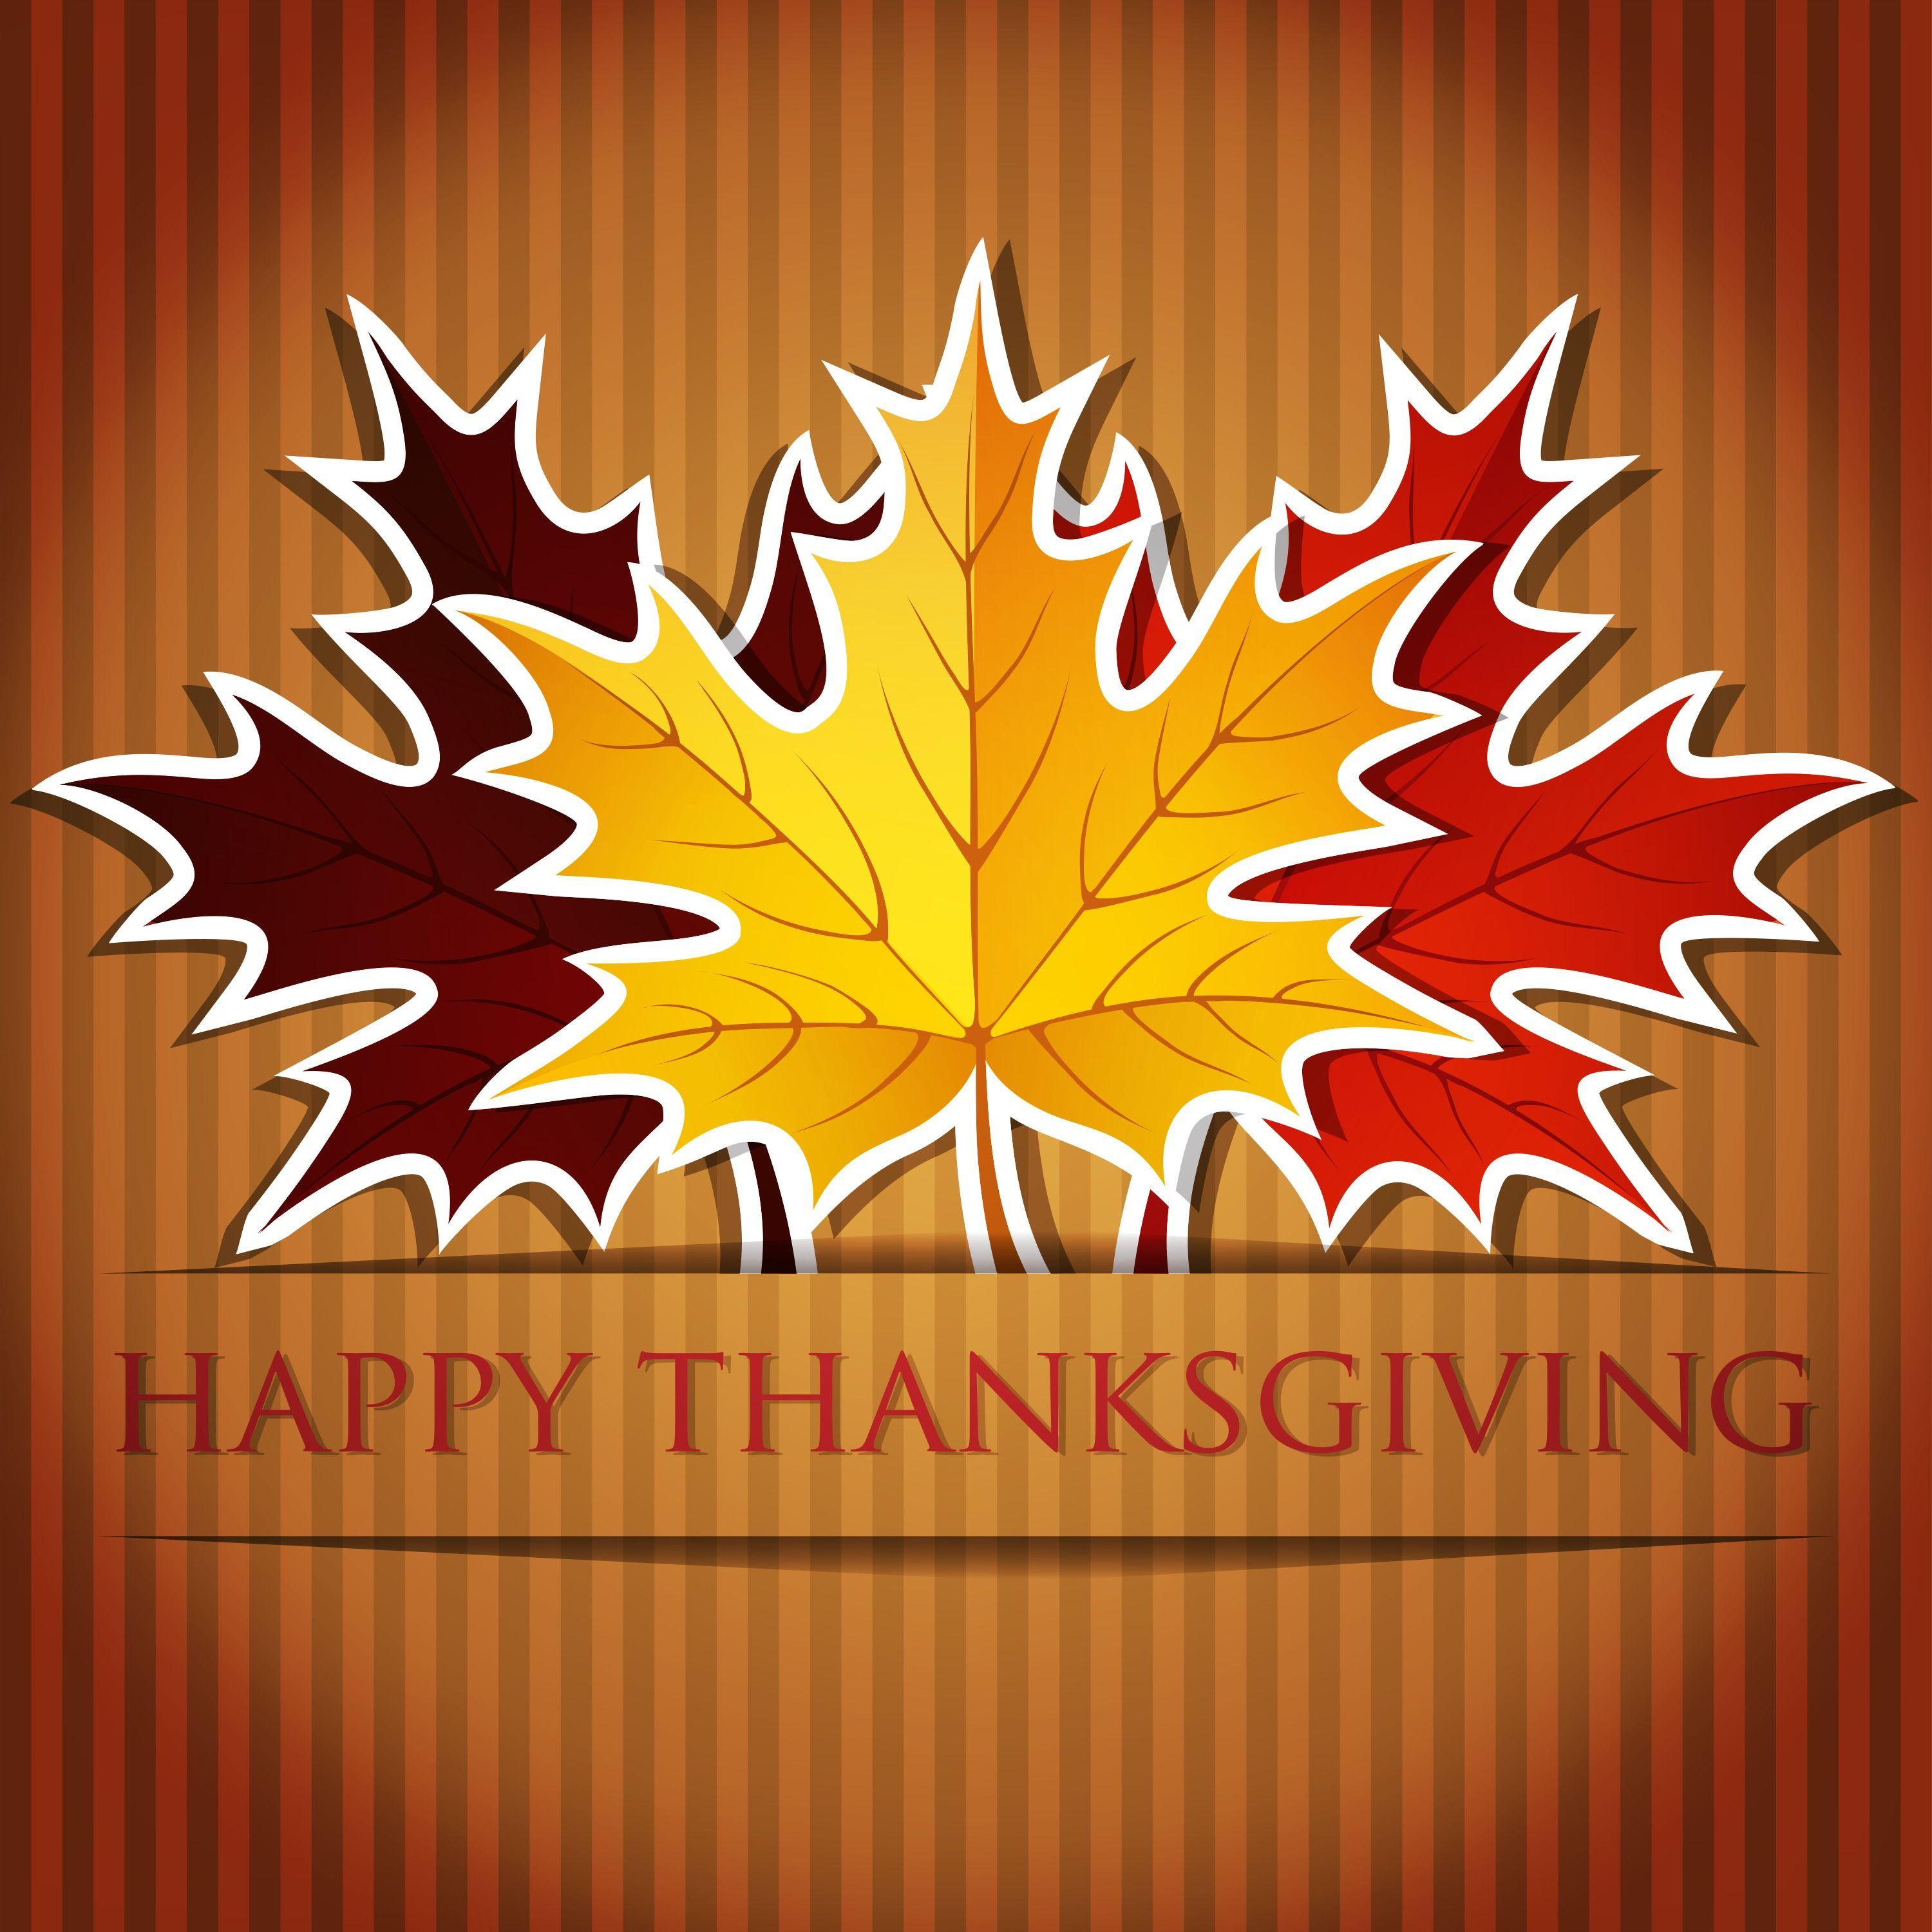 Canadian Thanksgiving Picture, Image